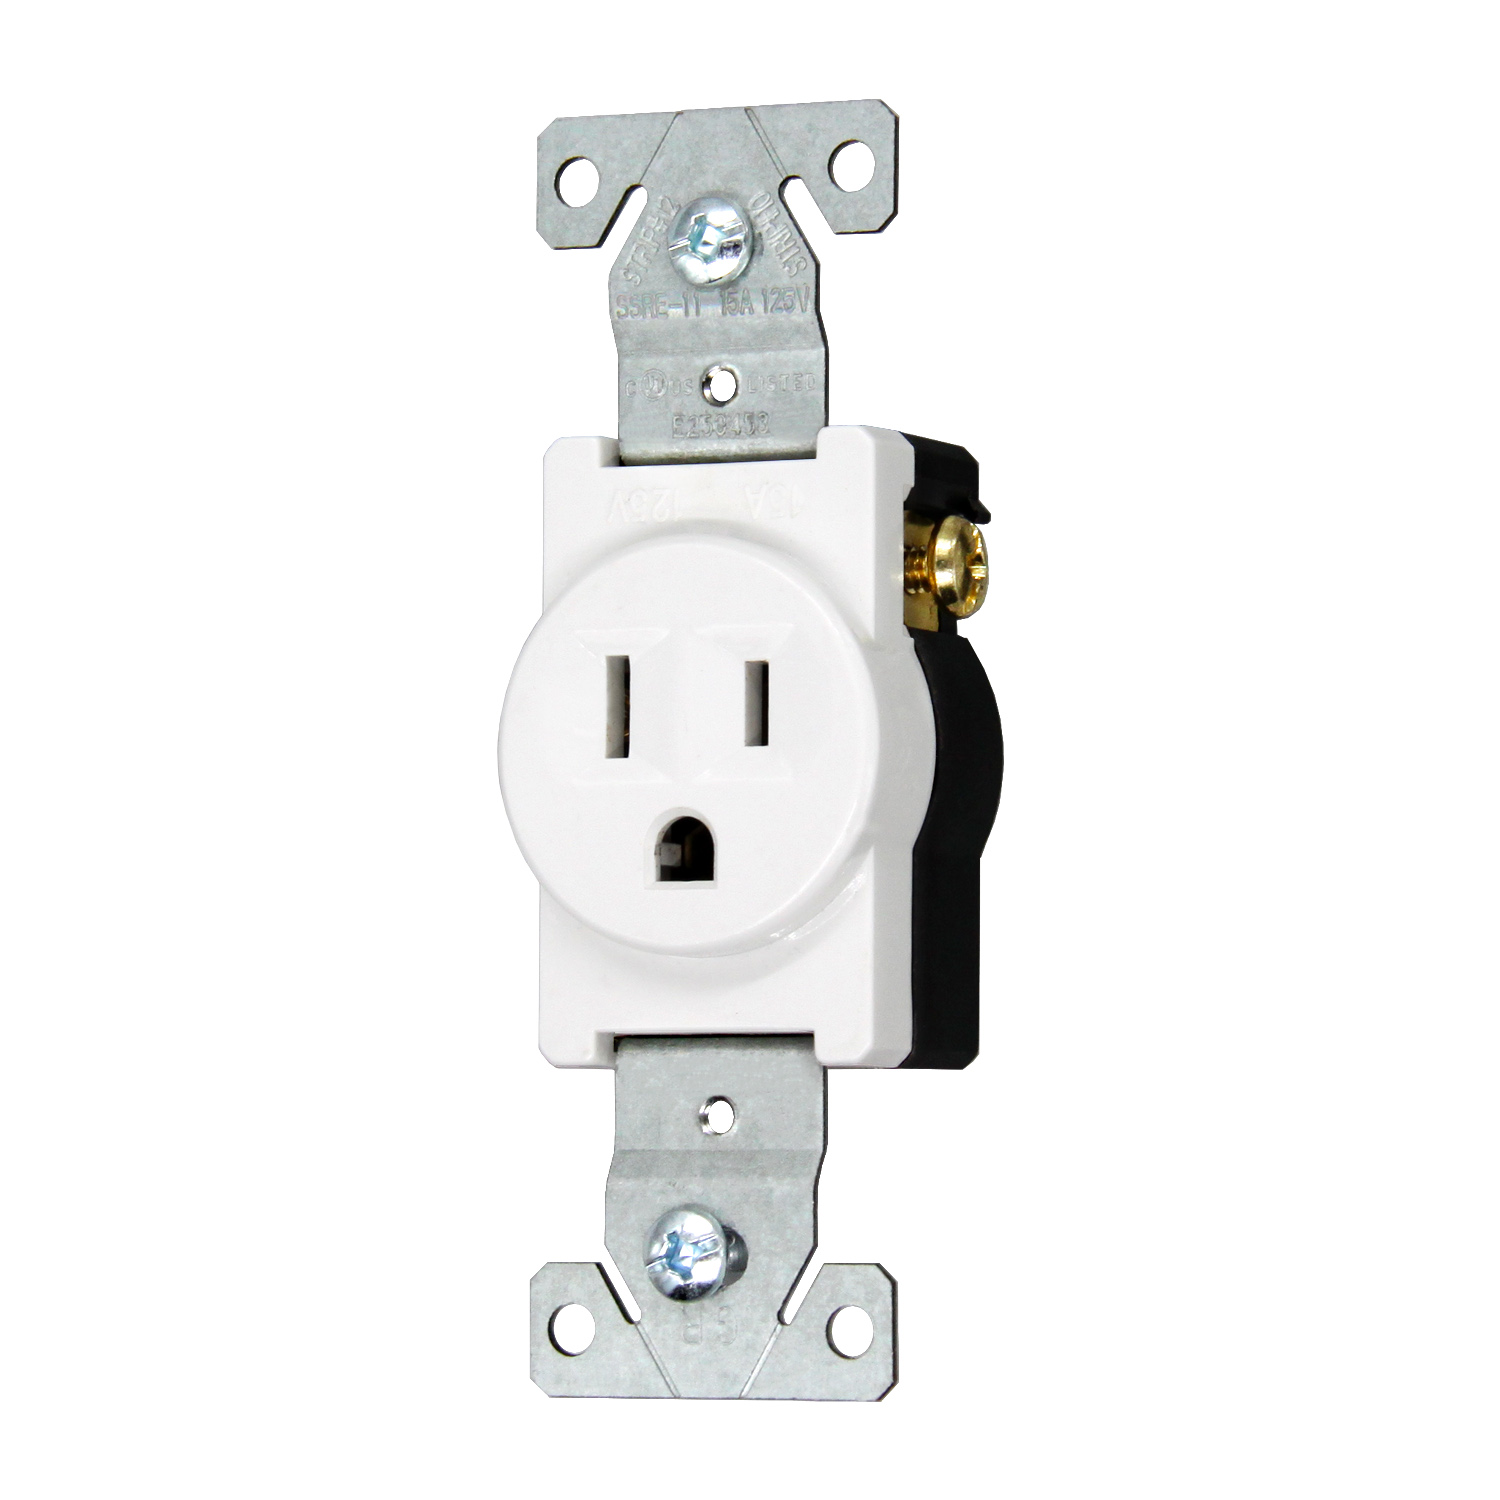 UL Listed Grounding Screw 15 Amp Single Receptacle Outlet, 125-Volt NEMA 5-15R, SSRE-11